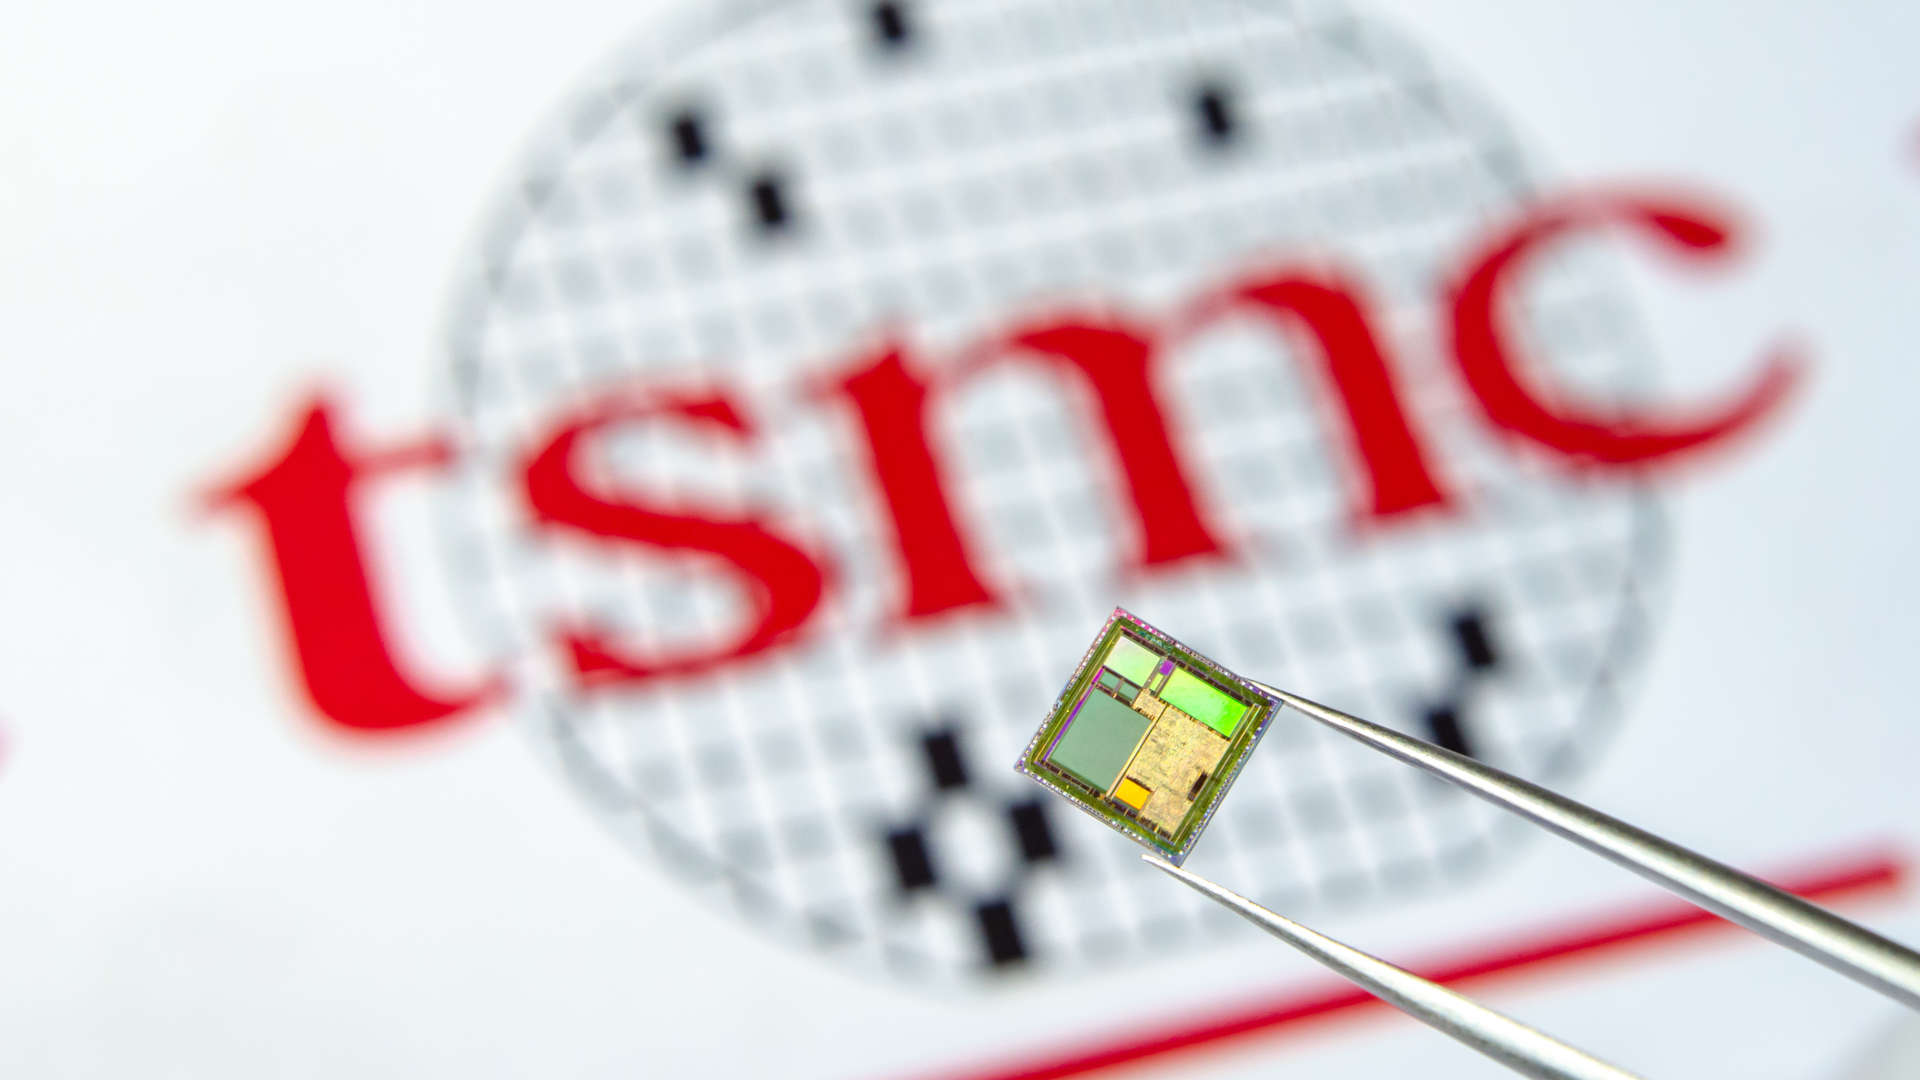 TSMC mentions 1.4nm process tech for the first time, says 2nm remains on track